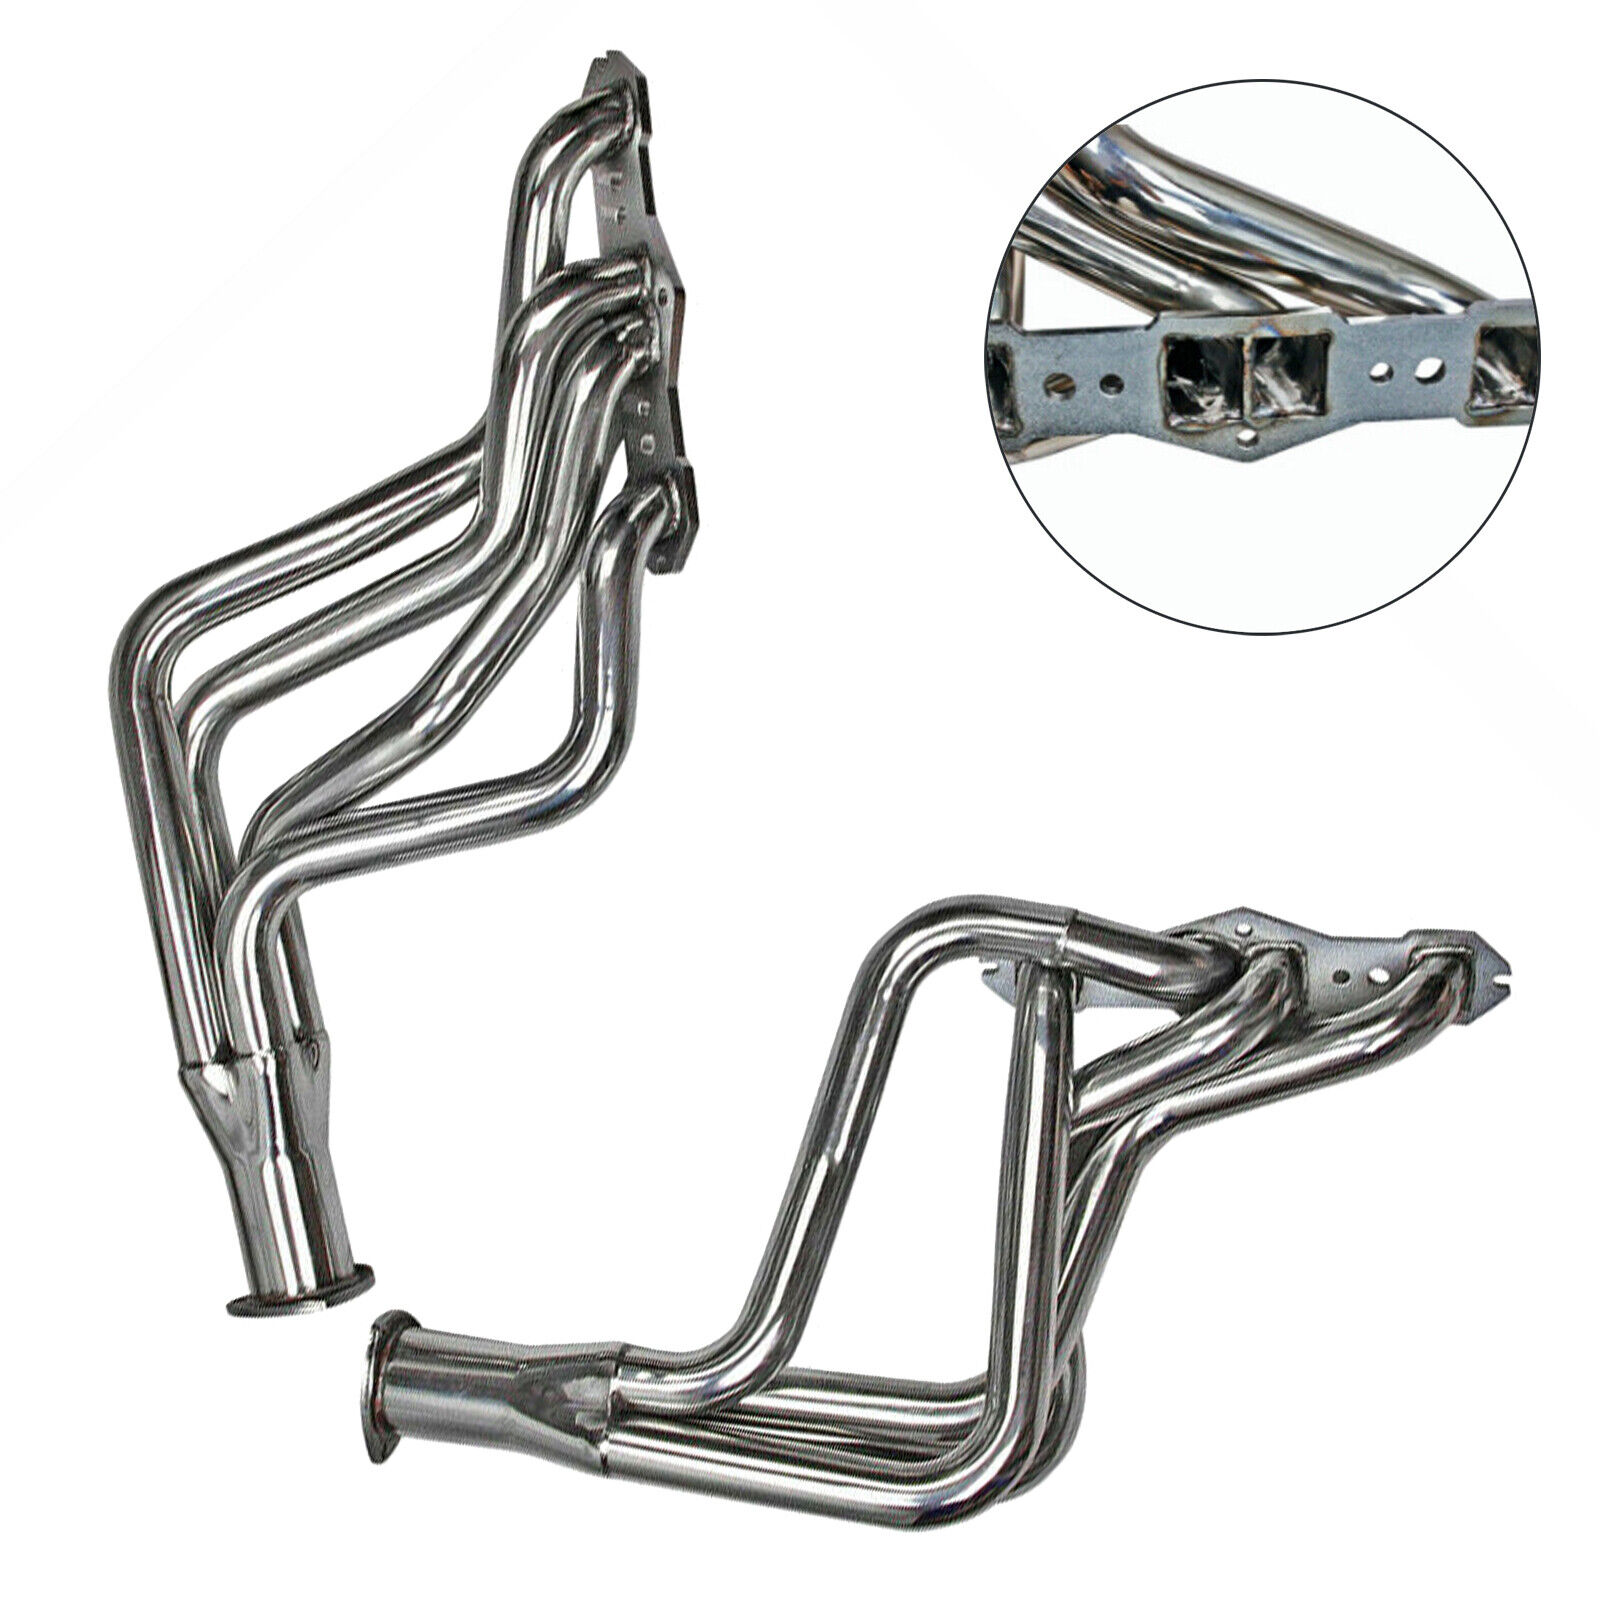 Stainless Long Tube Manifold Headers Fit Olds Cutlass Delta 65-74 350 400 455 3w